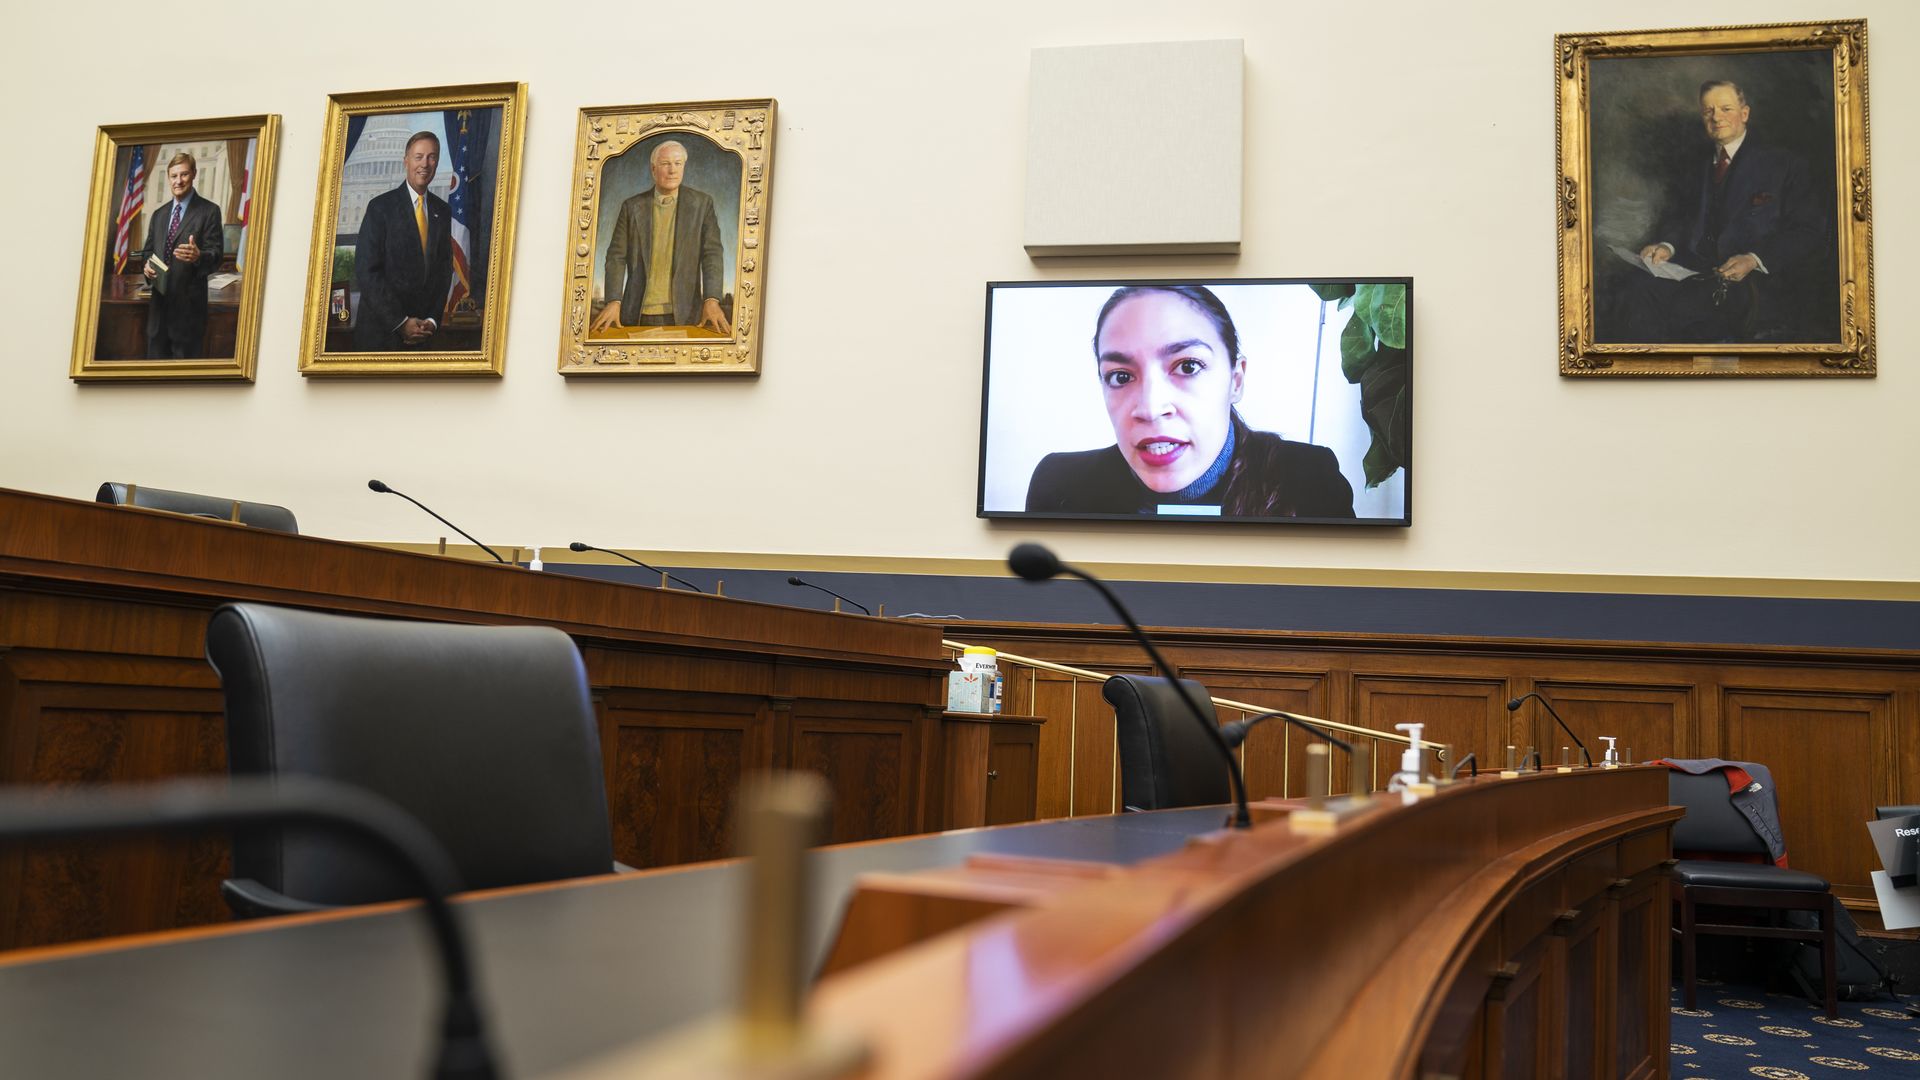 Rep. Alexandria Ocasio-Cortez is seen on a TV monitor as she beams into a House hearing.